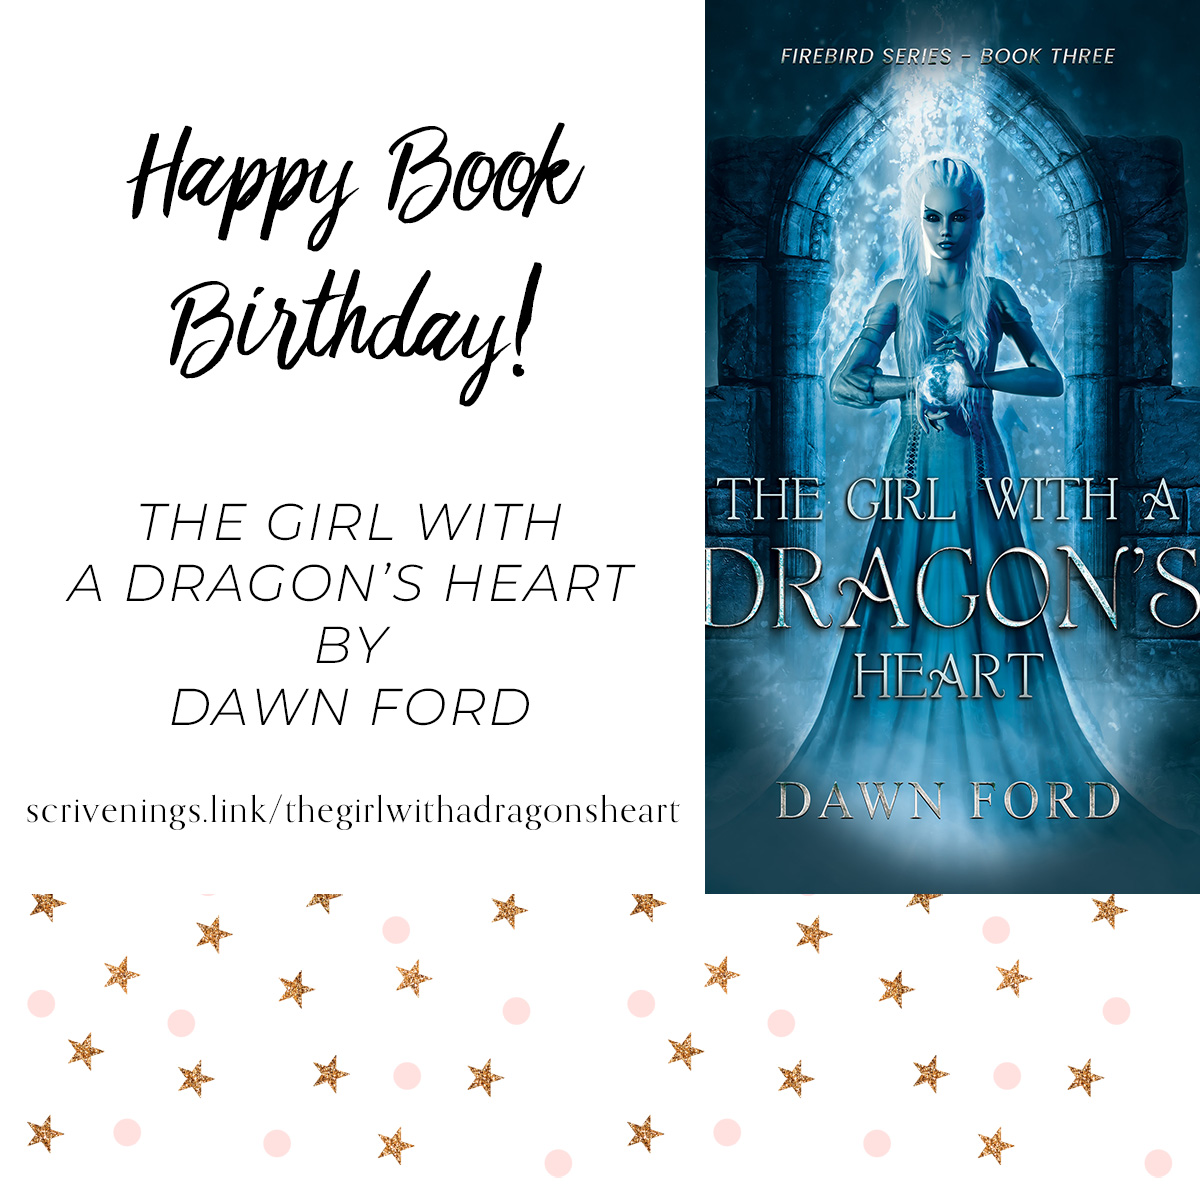 Happy Book Birthday to Dawn Ford upon the release of her #fantasynovel, The Girl with a Dragon's Heart.

scrivenings.link/thegirlwithadr…

Available in paperback, eBook, and on #KindleUnlimited.

#CleanFiction #newrelease #KU #bookbirthday #fantasyfiction #twistedfairytale